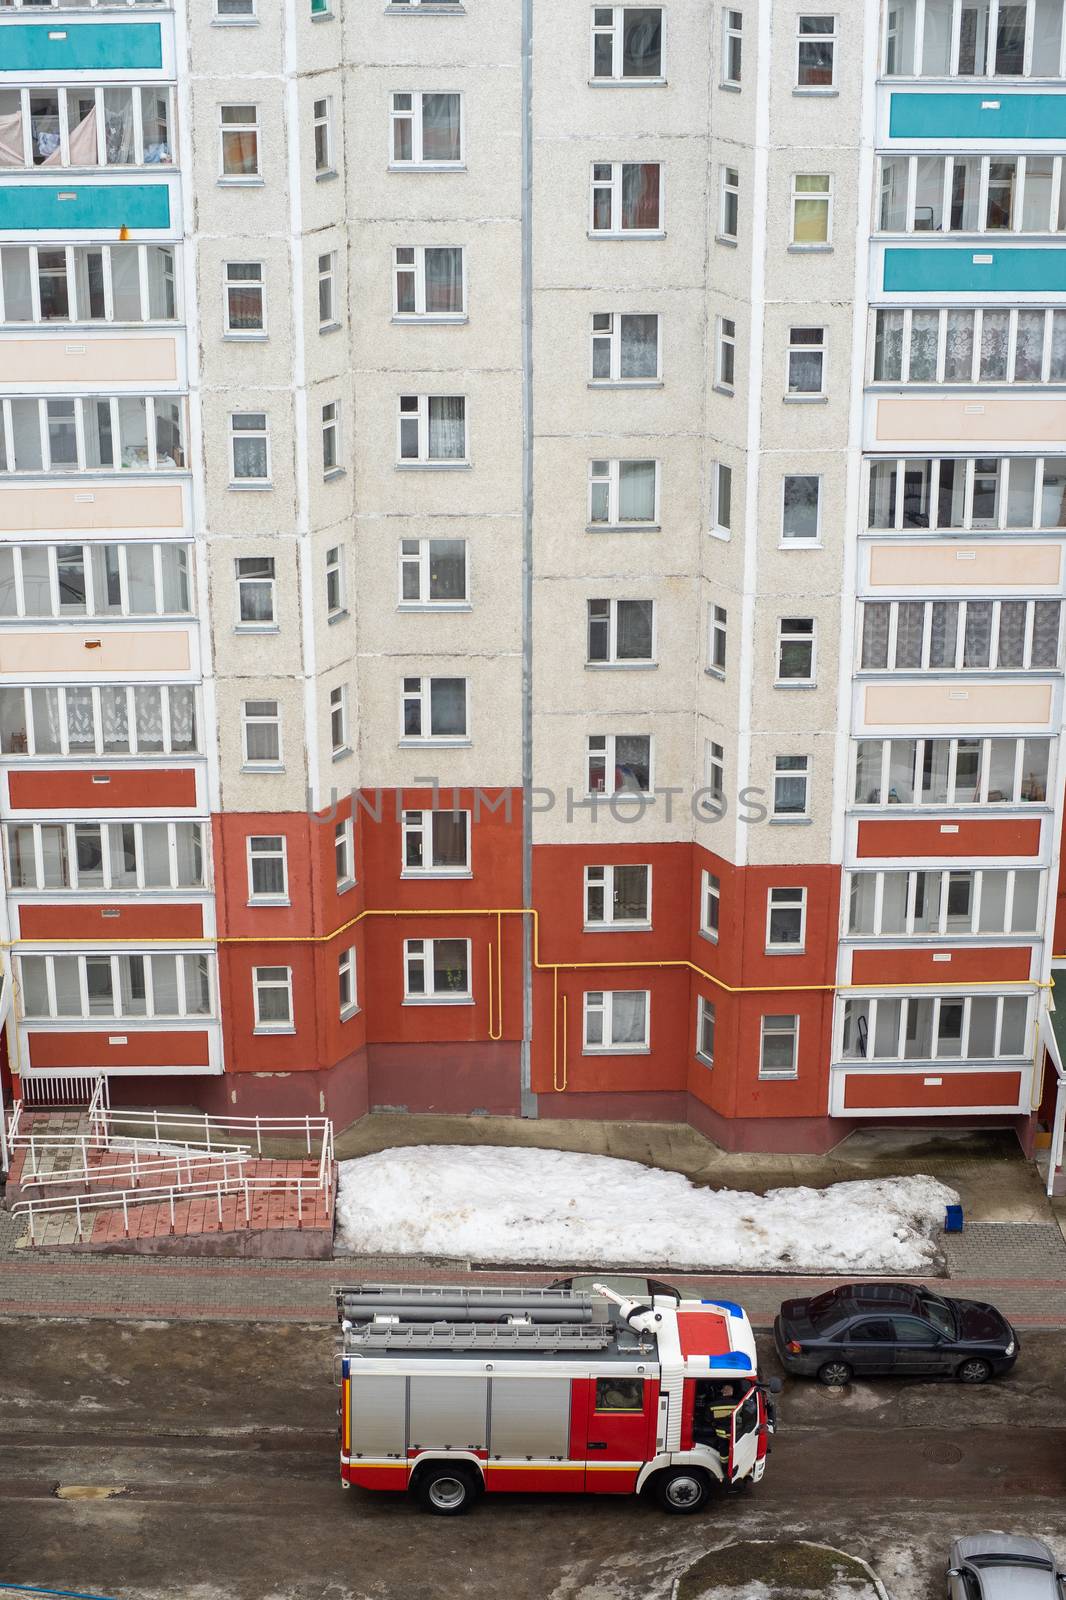 Fire engine in the courtyard of a multi-storey residential building in winter.